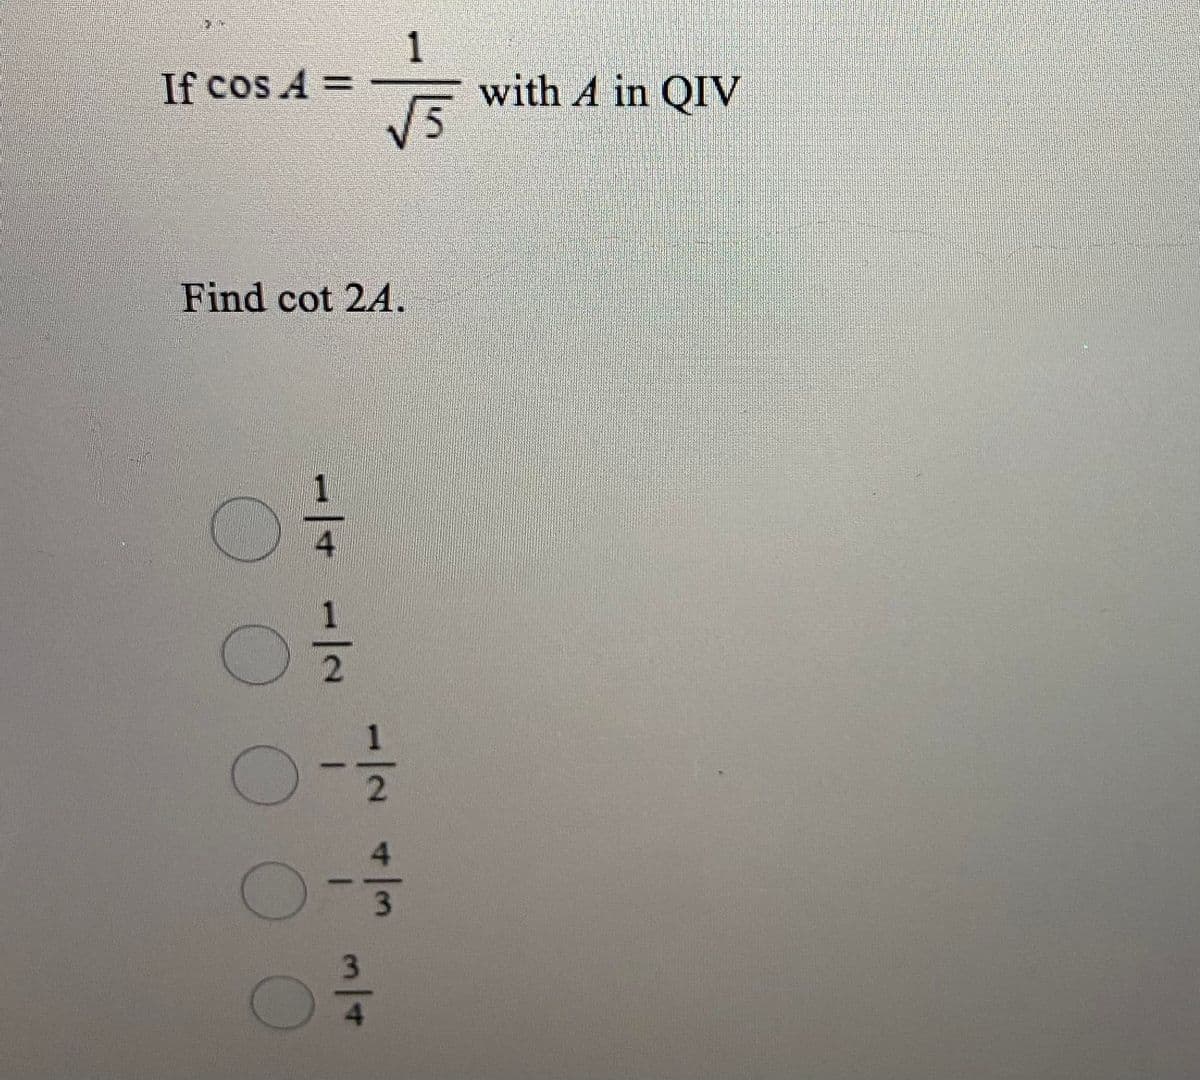 1
If cos A =
E with A in QIV
Find cot 24.
1/41/2
3/4
O O O
